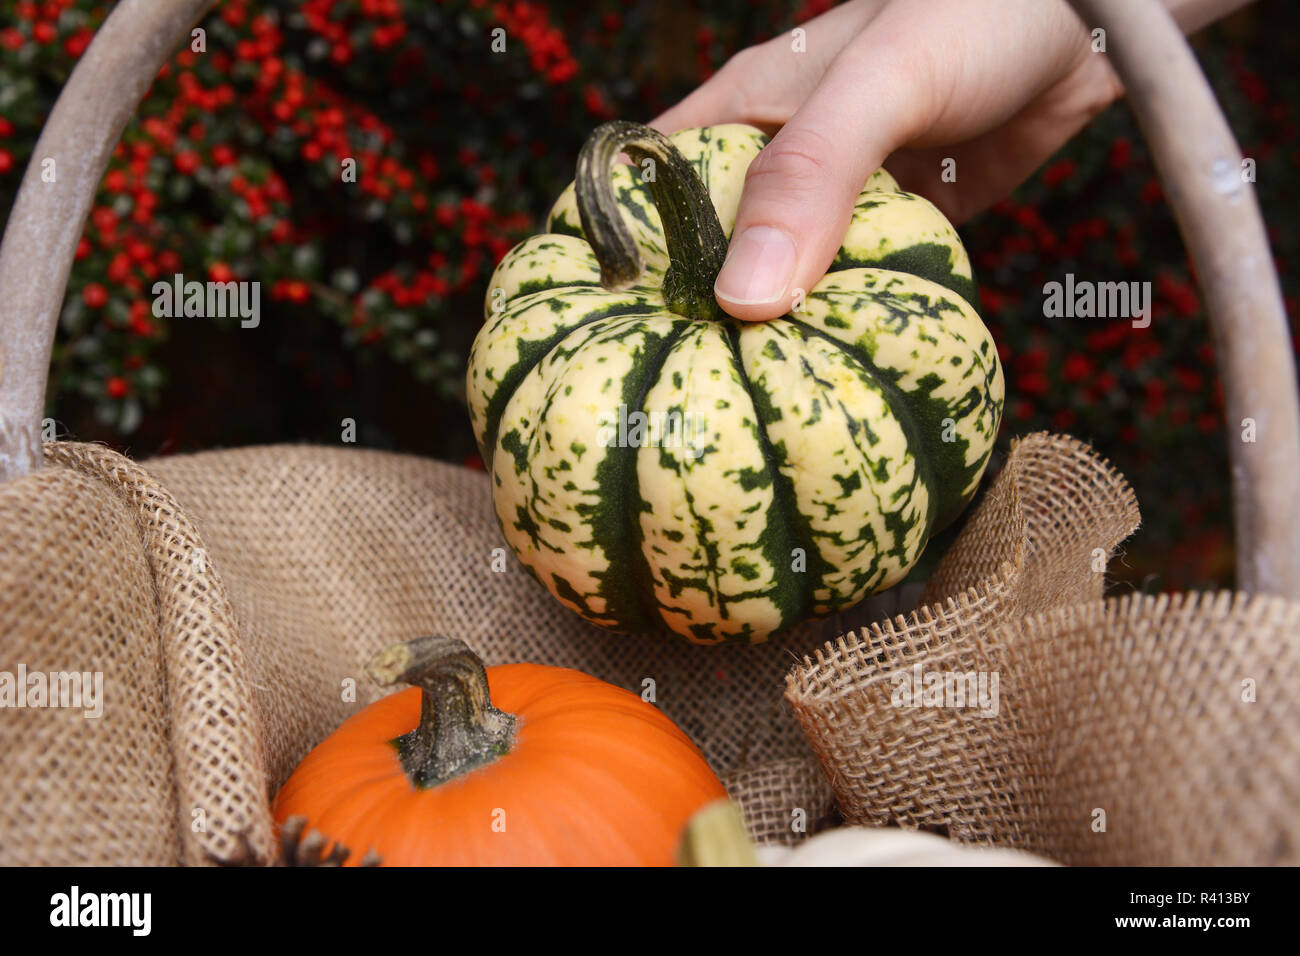 Young woman adds harlequin pumpkin to a basket Stock Photo